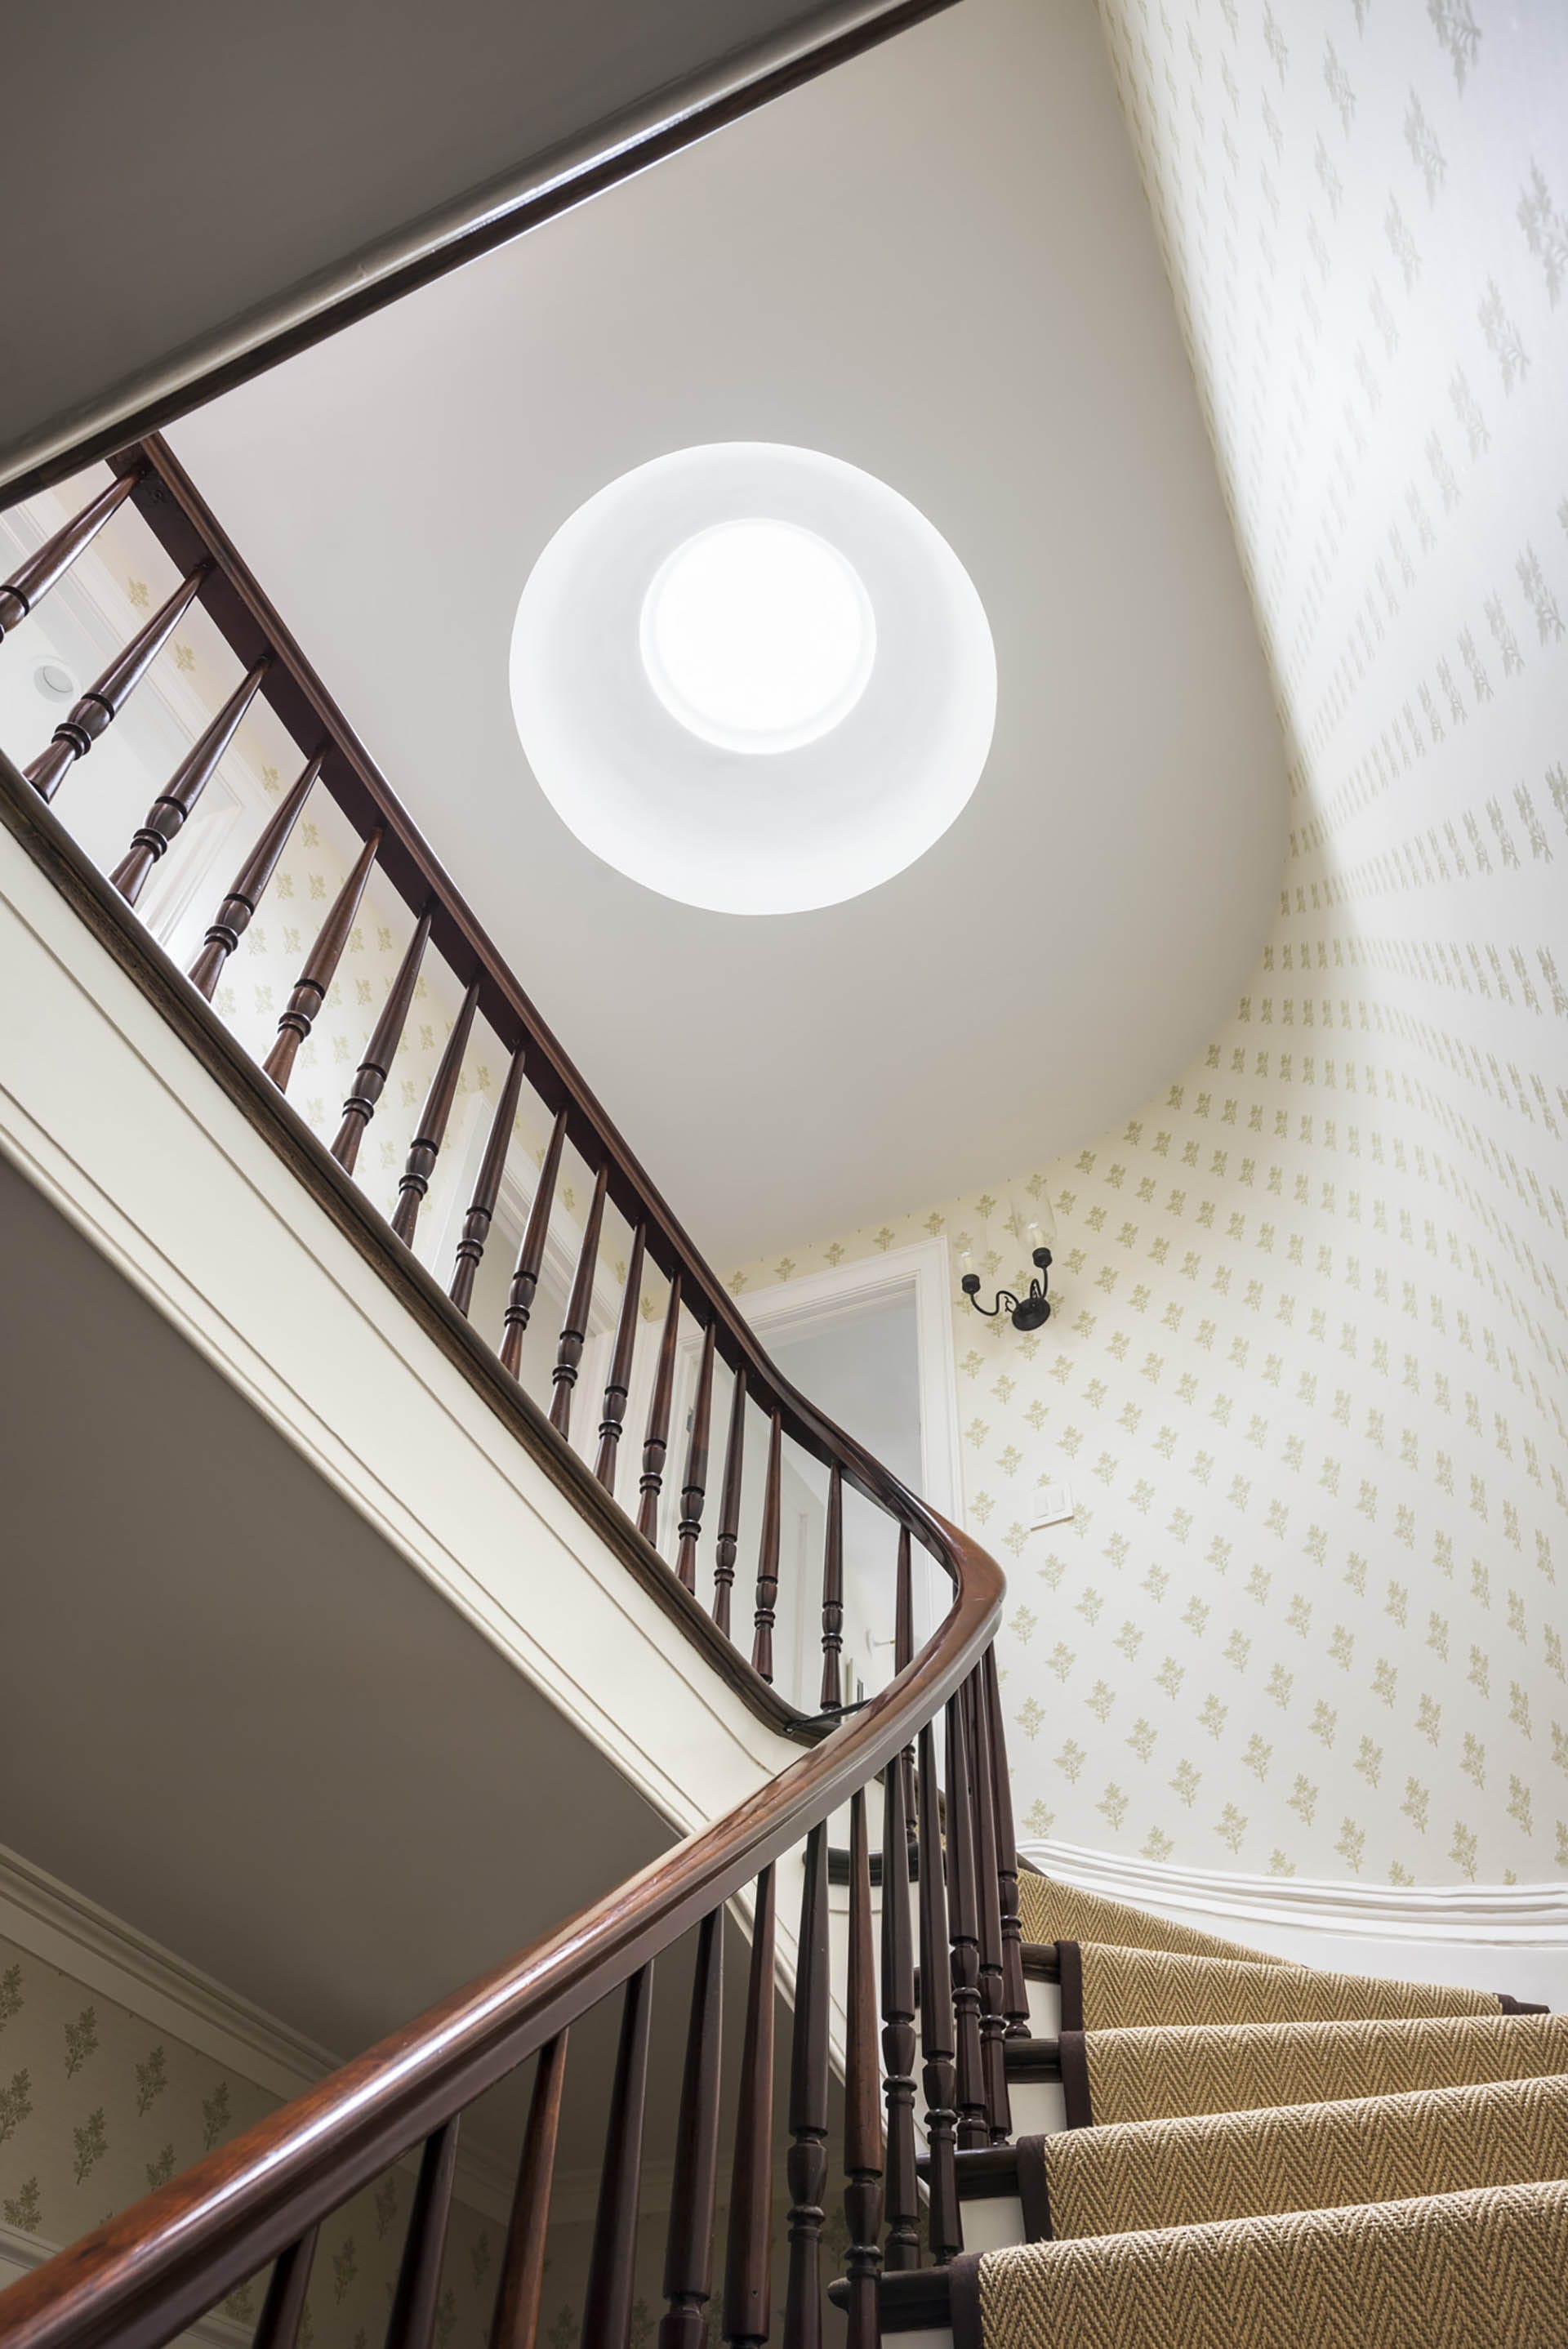 Circular skylight above the main staircase in a Brooklyn Heights home, with wallpaper in the stair hallway.